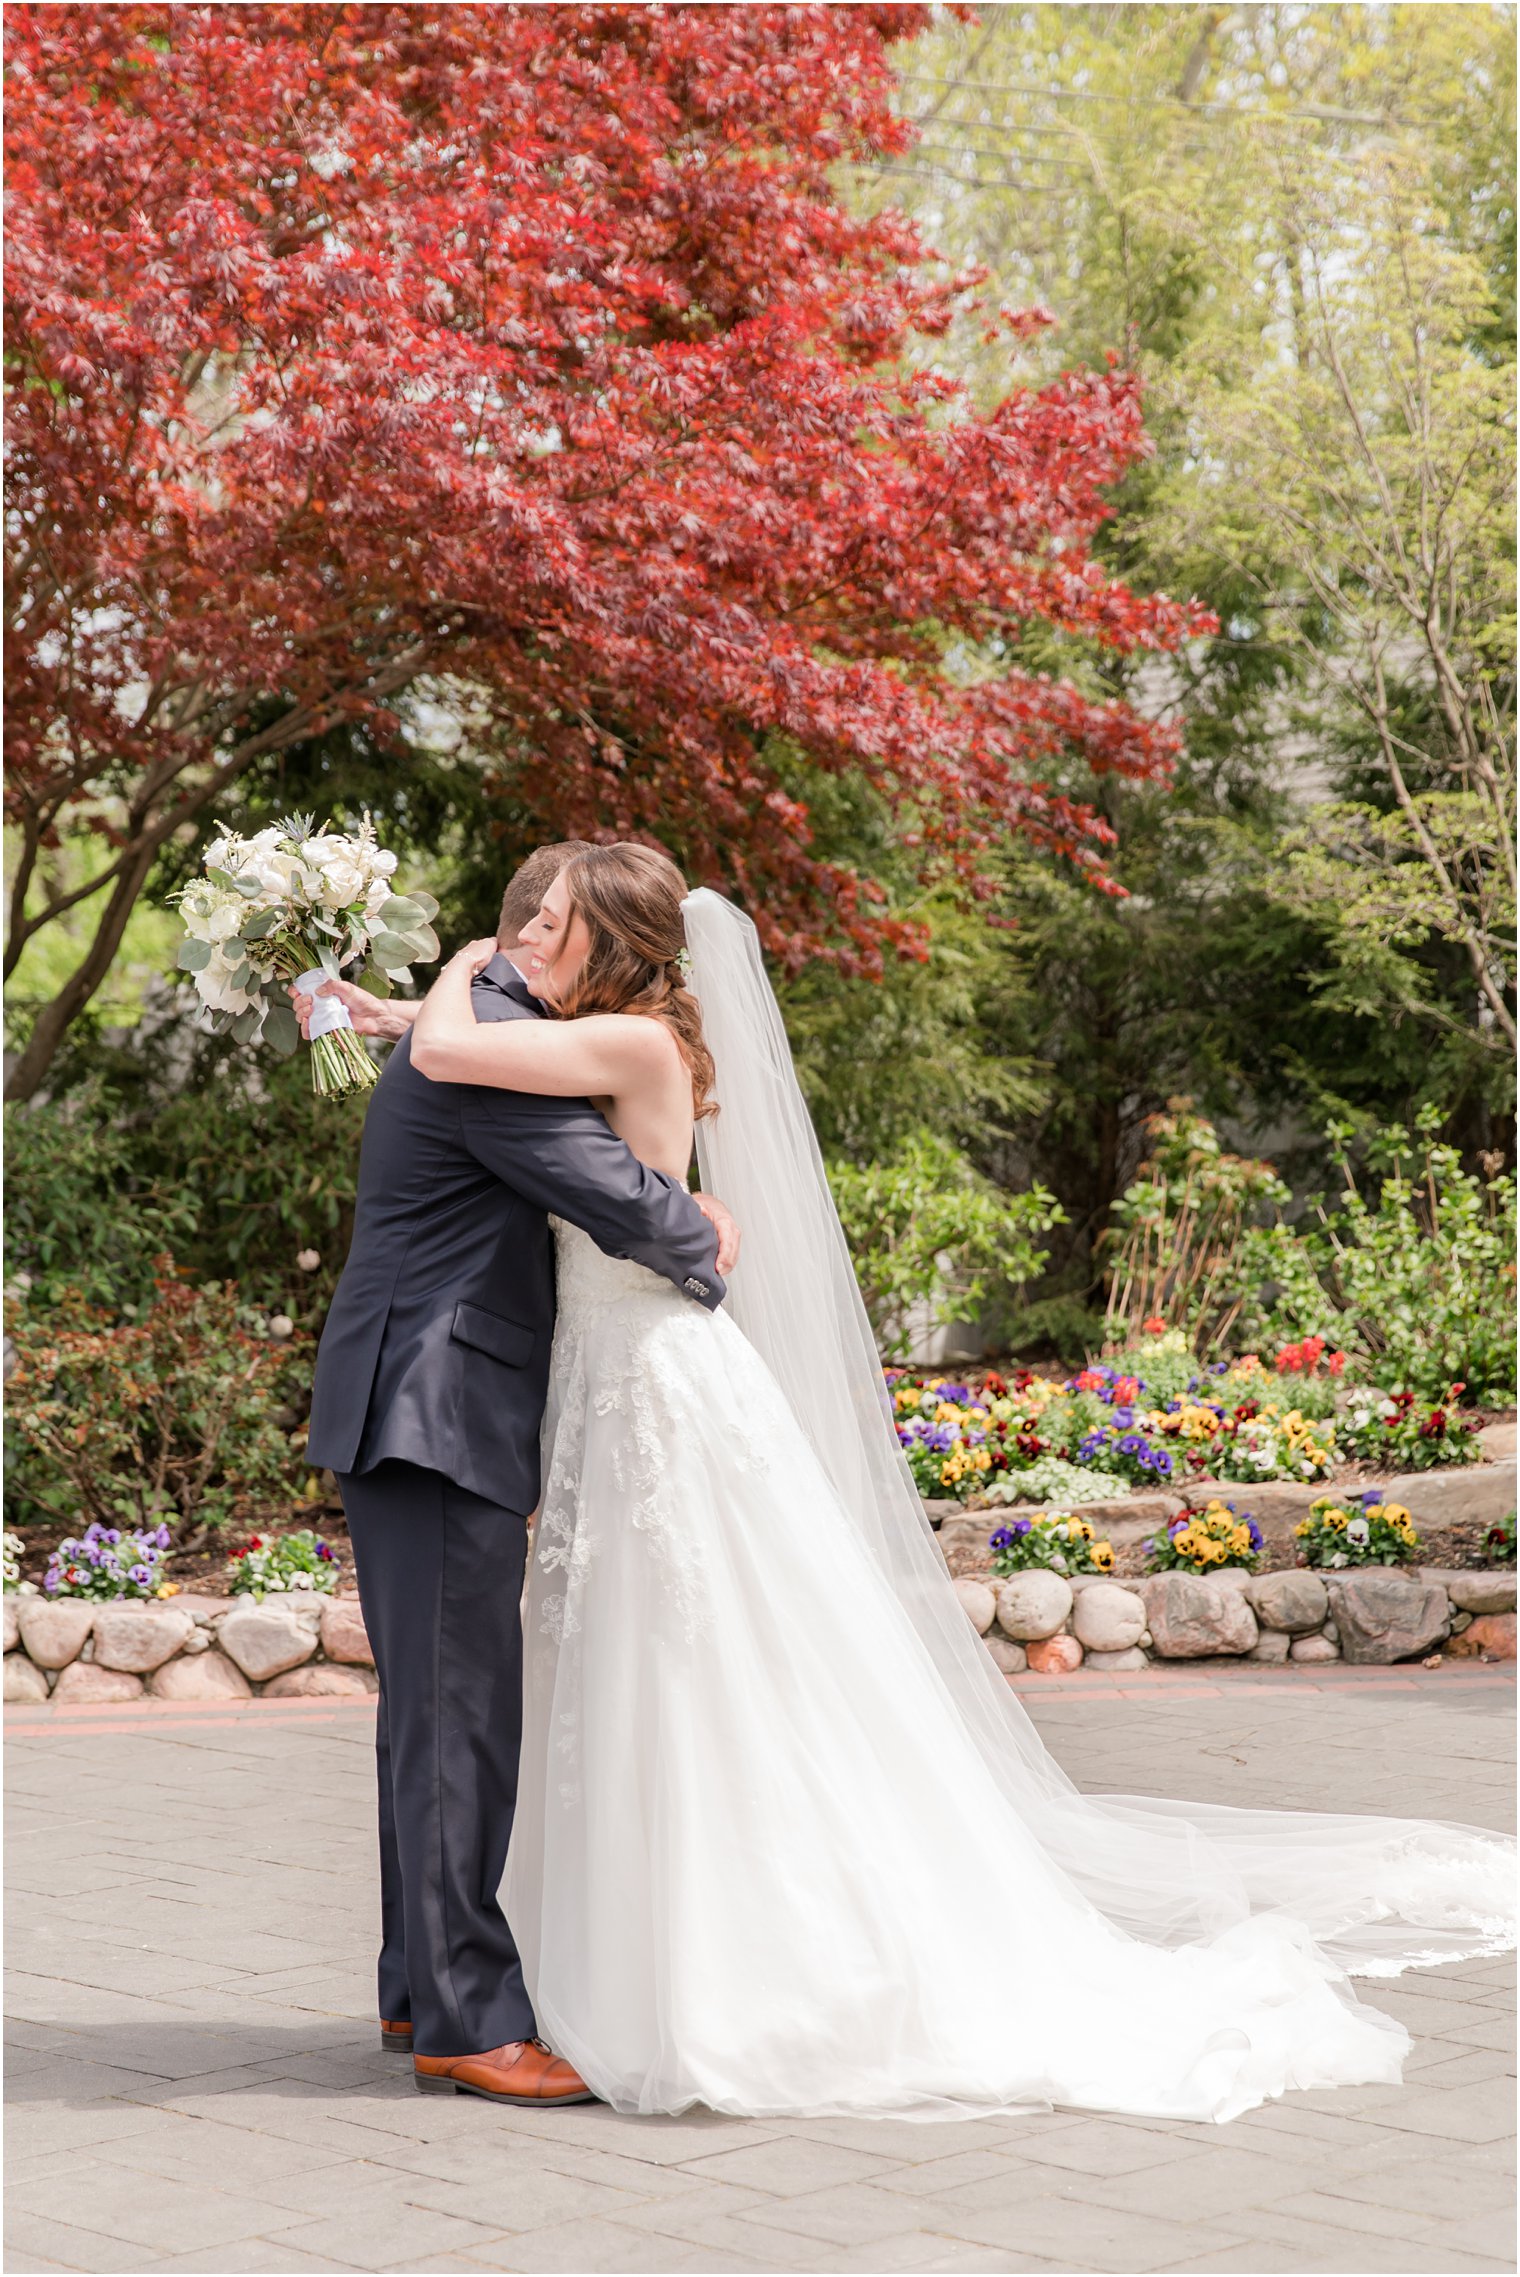 New Jersey newlyweds hug during first look before spring English Manor wedding day